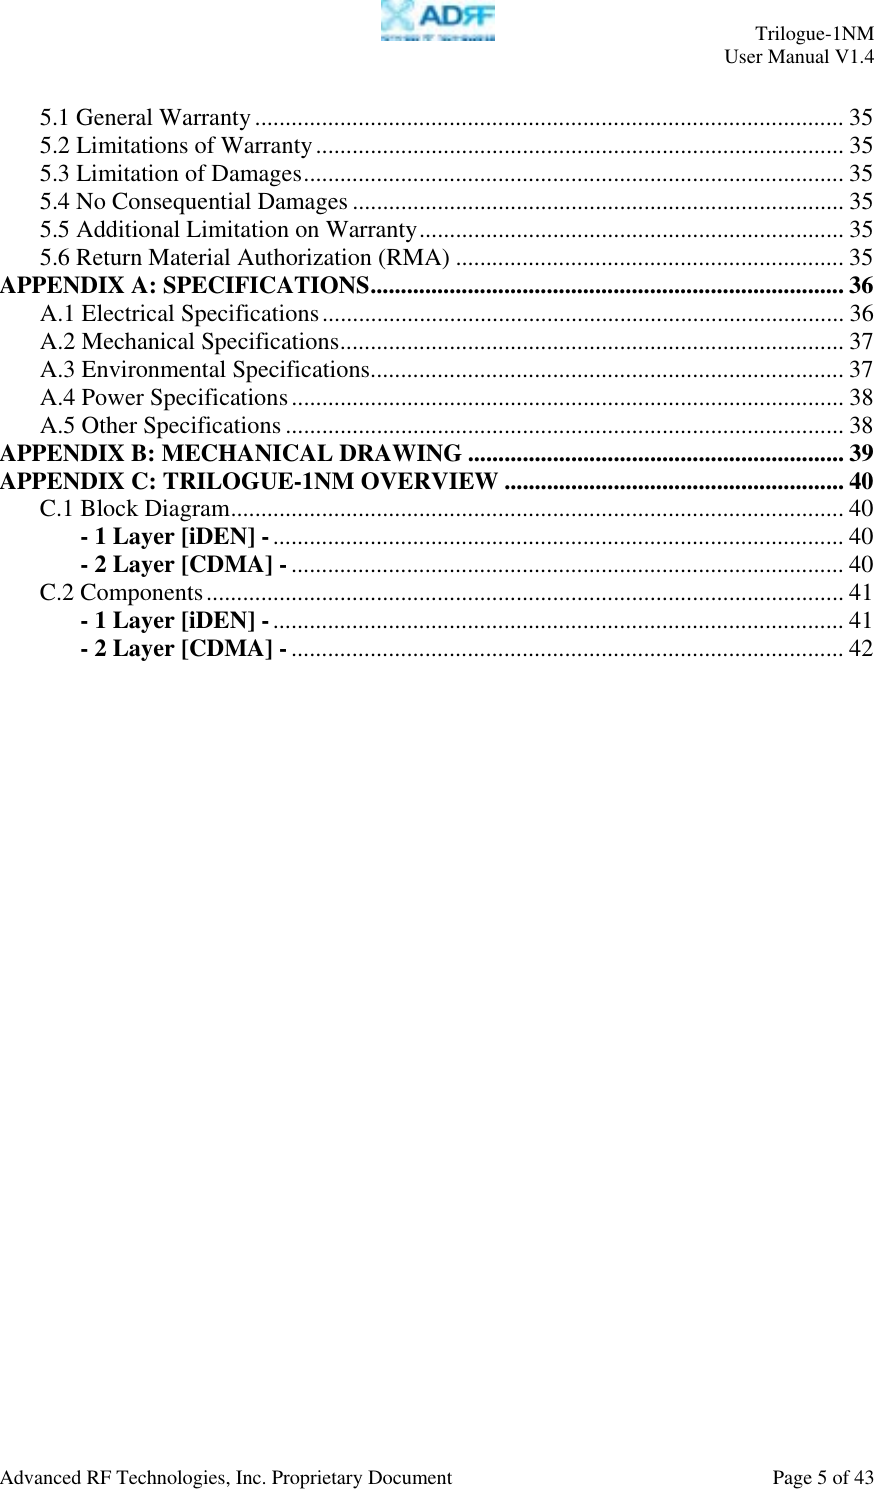     Trilogue-1NM User Manual V1.4  Advanced RF Technologies, Inc. Proprietary Document  Page 5 of 43  5.1 General Warranty................................................................................................. 35 5.2 Limitations of Warranty....................................................................................... 35 5.3 Limitation of Damages......................................................................................... 35 5.4 No Consequential Damages ................................................................................. 35 5.5 Additional Limitation on Warranty...................................................................... 35 5.6 Return Material Authorization (RMA) ................................................................ 35 APPENDIX A: SPECIFICATIONS.............................................................................. 36 A.1 Electrical Specifications...................................................................................... 36 A.2 Mechanical Specifications................................................................................... 37 A.3 Environmental Specifications.............................................................................. 37 A.4 Power Specifications........................................................................................... 38 A.5 Other Specifications............................................................................................ 38 APPENDIX B: MECHANICAL DRAWING .............................................................. 39 APPENDIX C: TRILOGUE-1NM OVERVIEW ........................................................ 40 C.1 Block Diagram..................................................................................................... 40 - 1 Layer [iDEN] -.............................................................................................. 40 - 2 Layer [CDMA] -........................................................................................... 40 C.2 Components......................................................................................................... 41 - 1 Layer [iDEN] -.............................................................................................. 41 - 2 Layer [CDMA] -........................................................................................... 42       